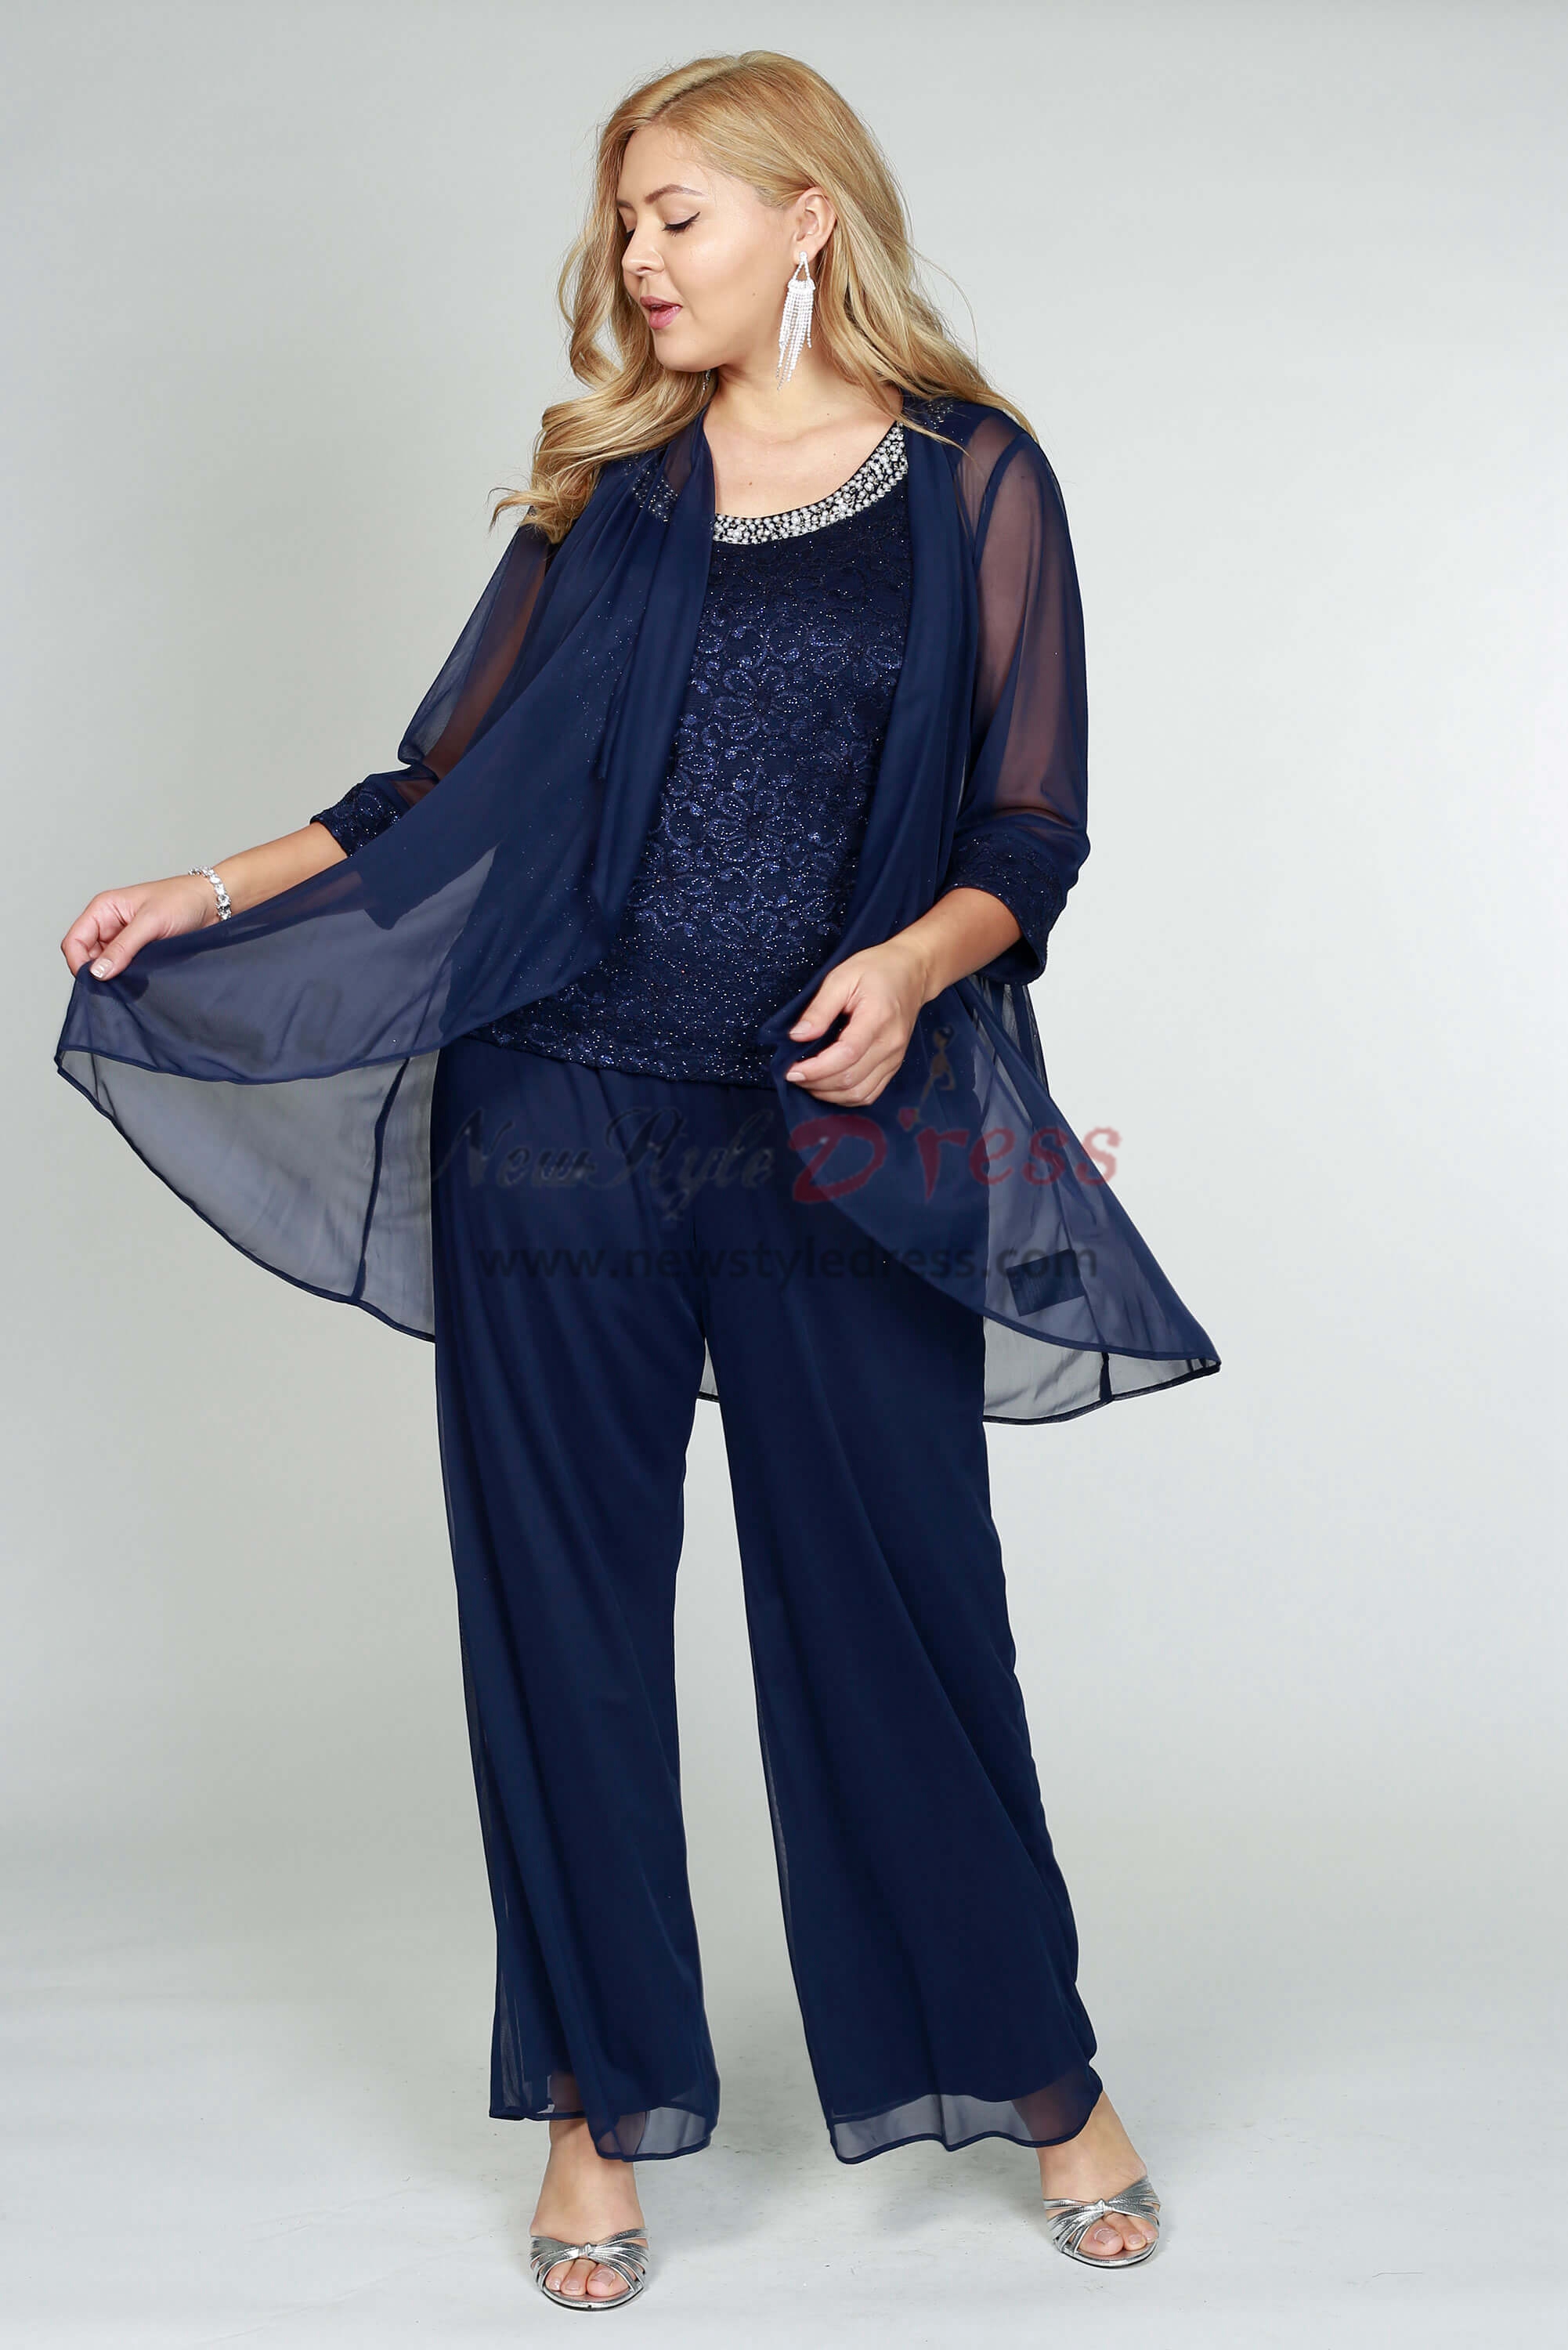 Plus Size Dark Navy Chiffon Trousers Outfit for Women Mother of the ...